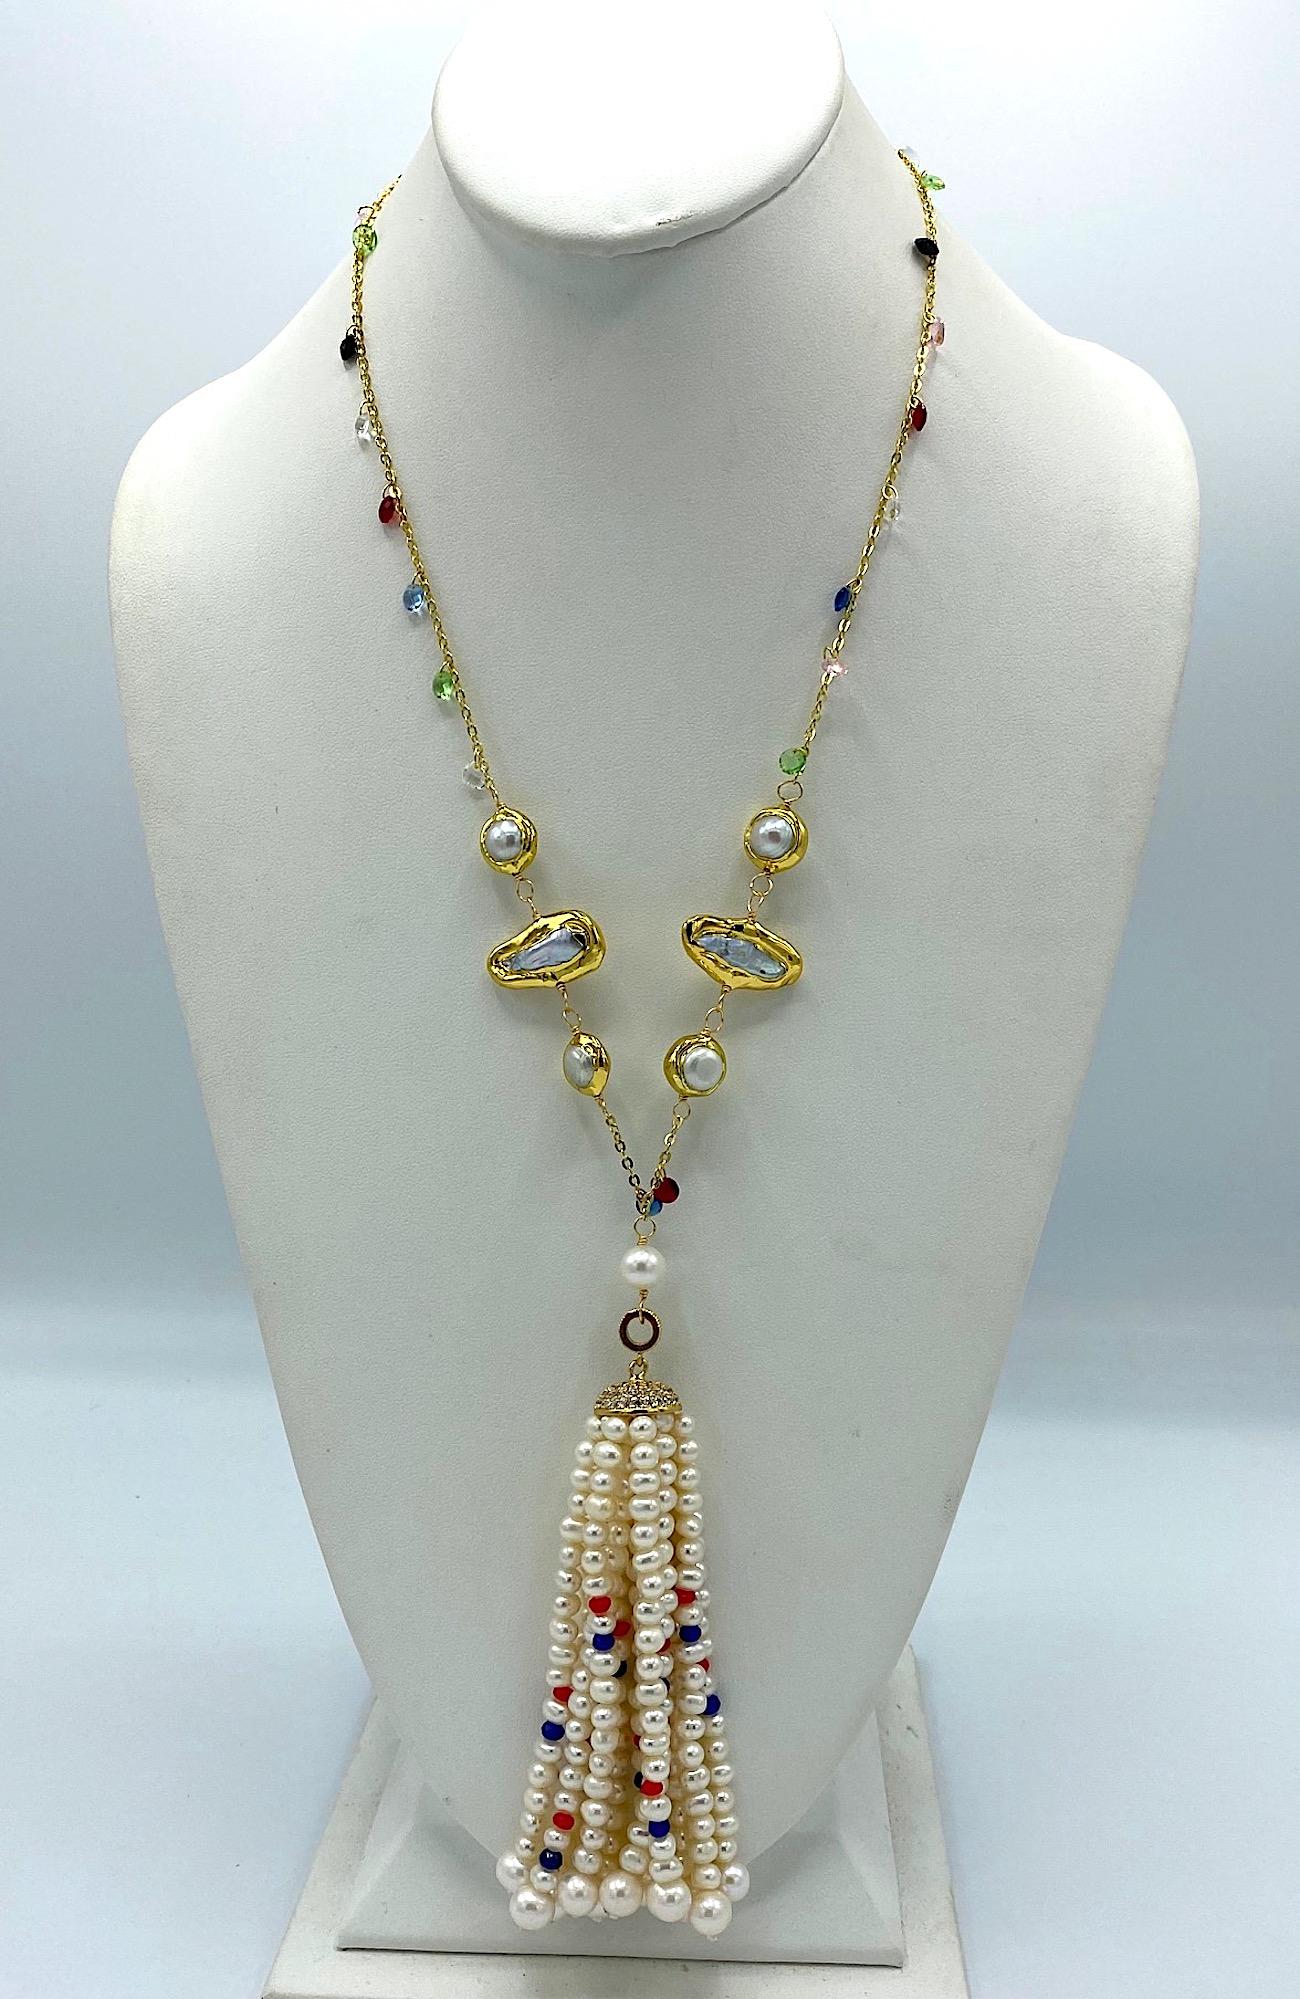 A wonderful and fun natural pearl tassel pendant necklace. The necklace has a 24.5 inch long fine gold plate chain with 28 faceted briolette multi color crystals. Additionally, there are four round and two long natural fresh w water Biwa Pearls set